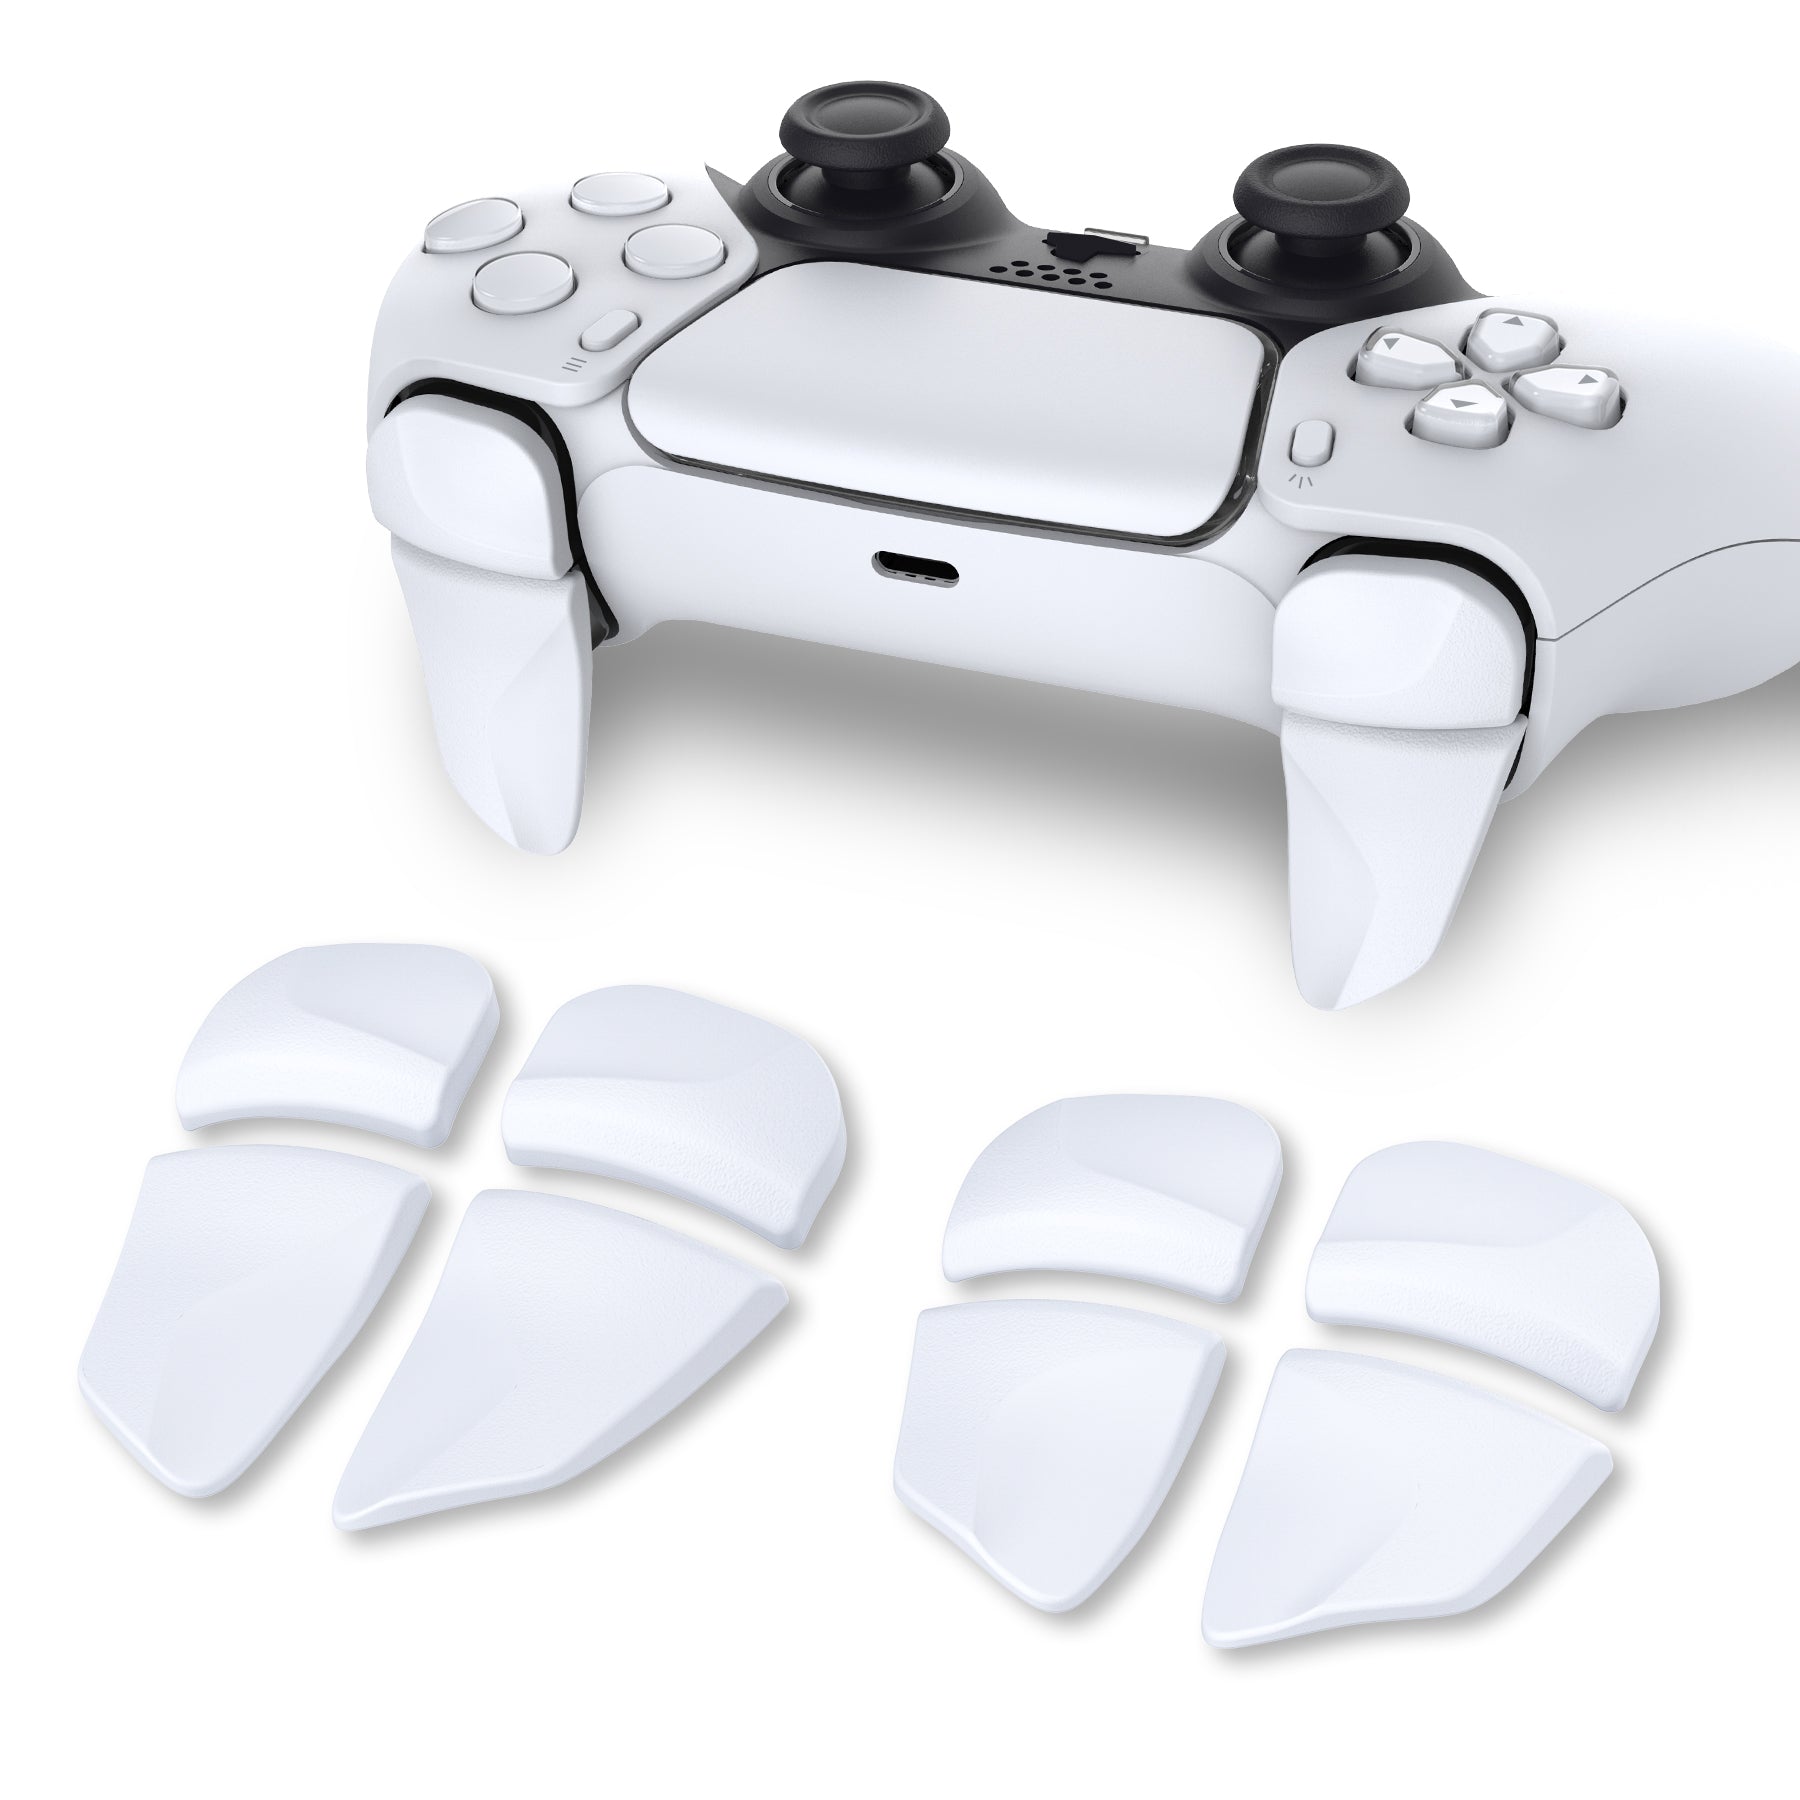 PlayVital White 2 Pair Shoulder Buttons Extension Triggers for PS5 Controller, Game Improvement Adjusters for PS5 Controller, Bumper Trigger Extenders for PS5 Controller - PFPJ045 PlayVital